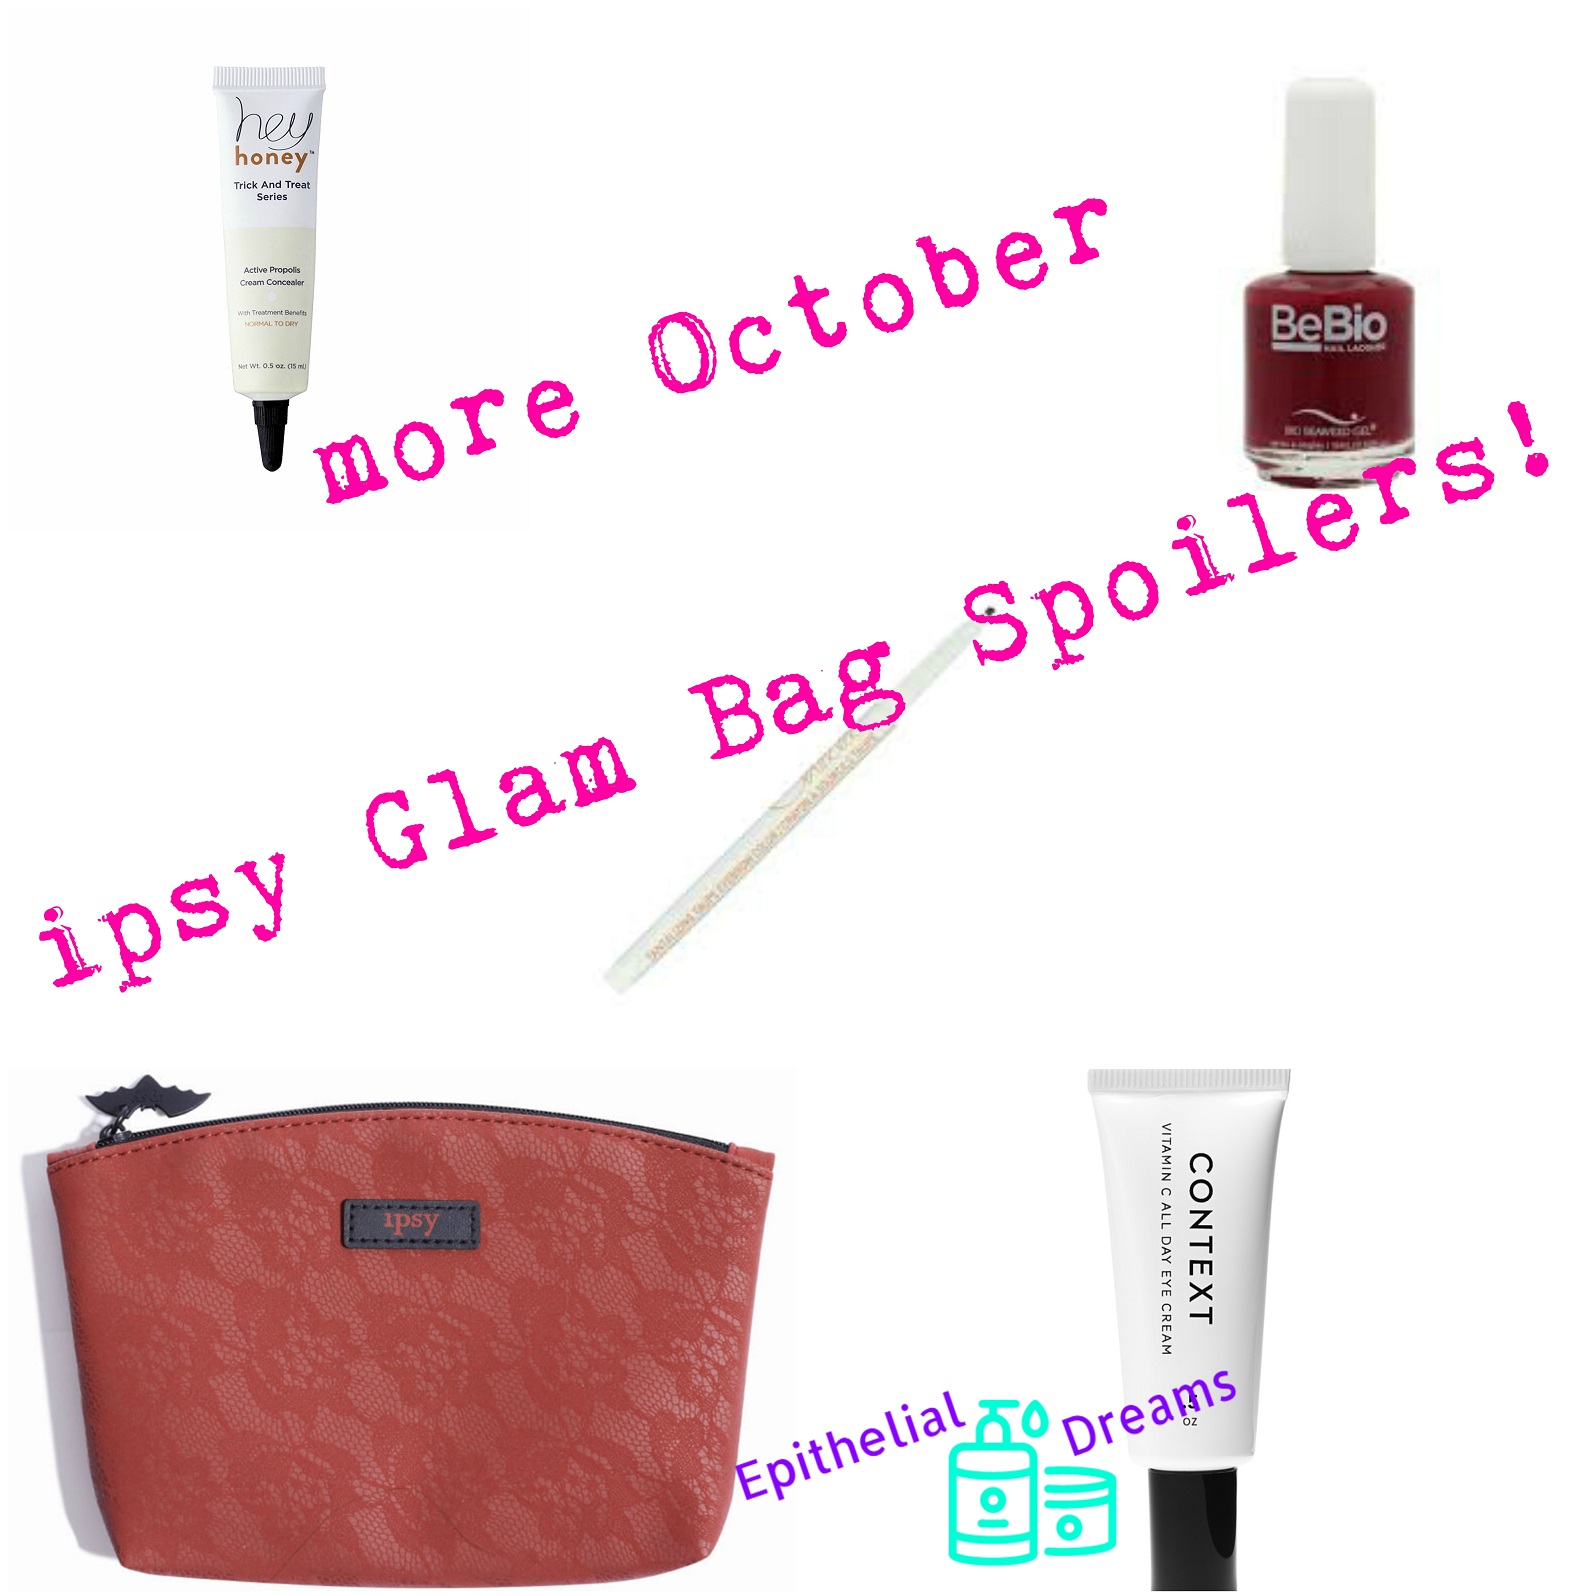 Even More ipsy October Glam Bag Spoilers!